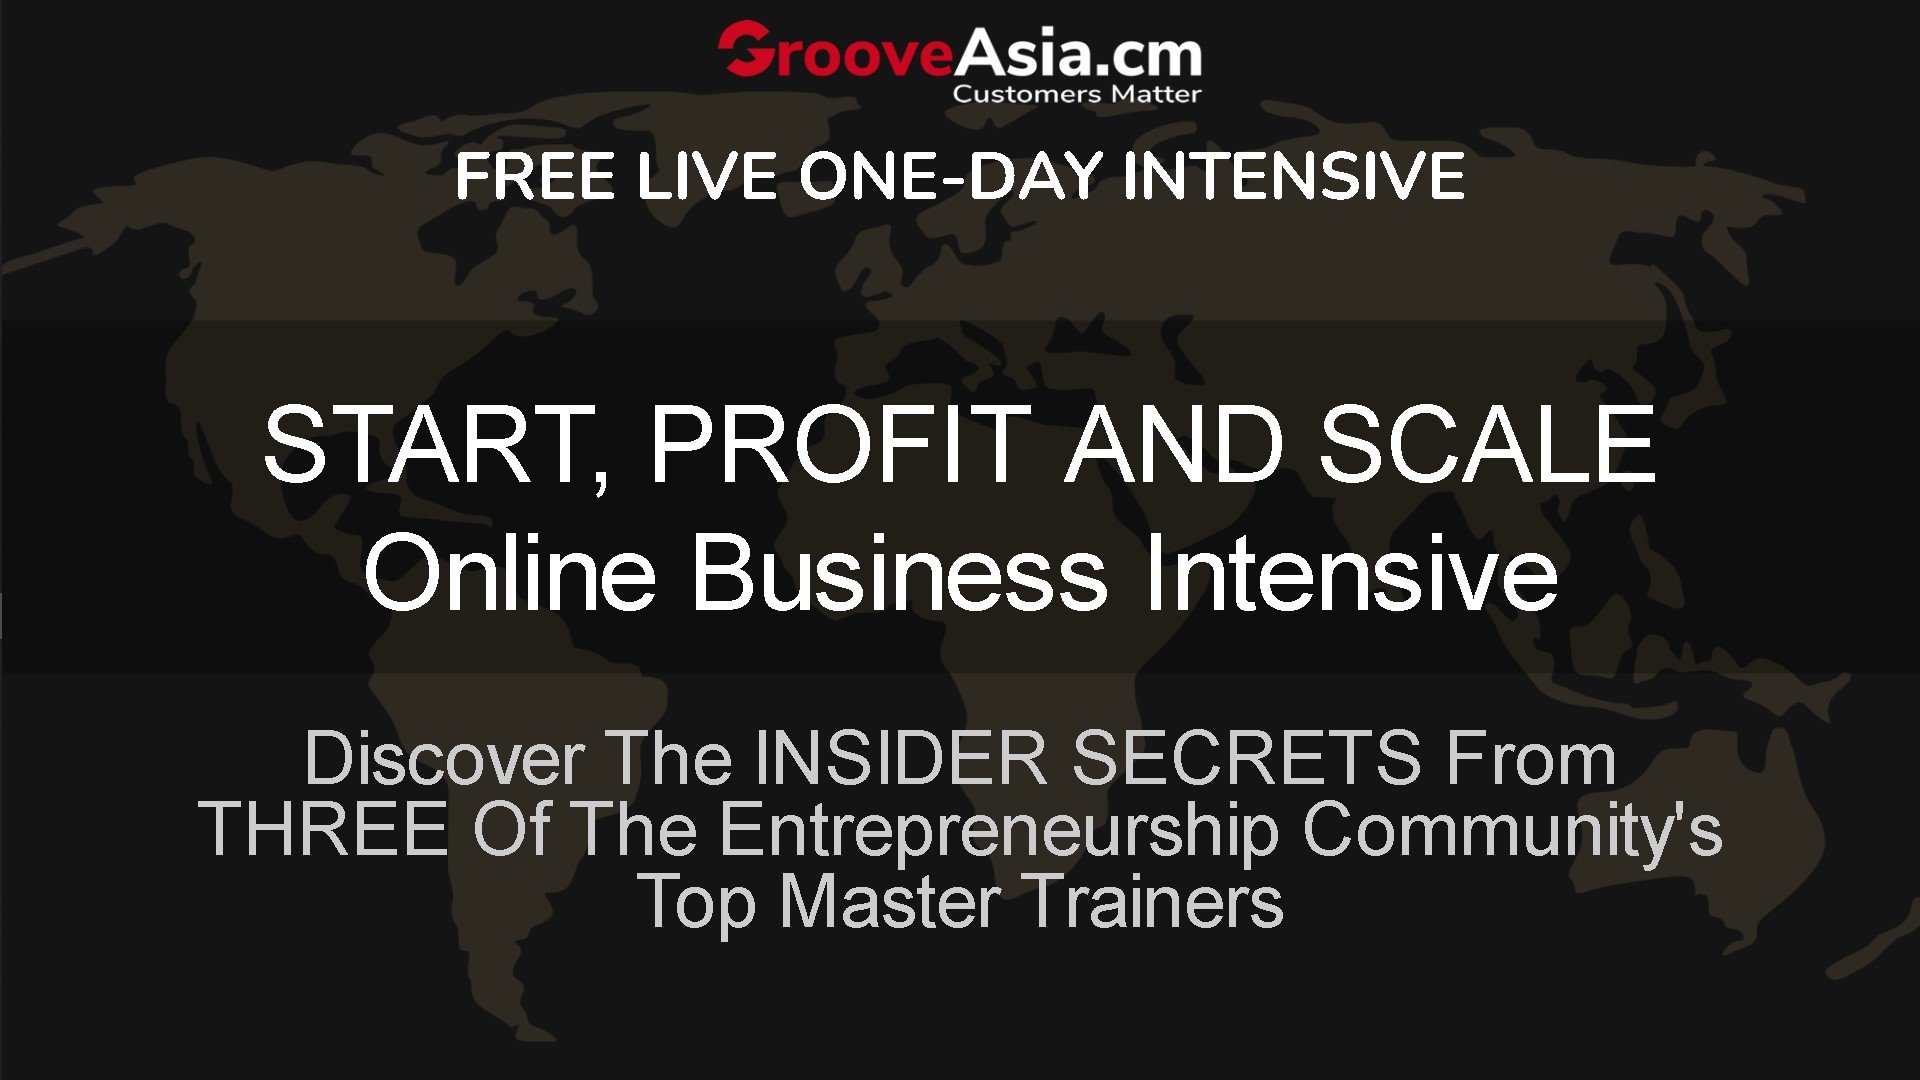 How To Start, Profit And Scale Your Online Business... For FREE!